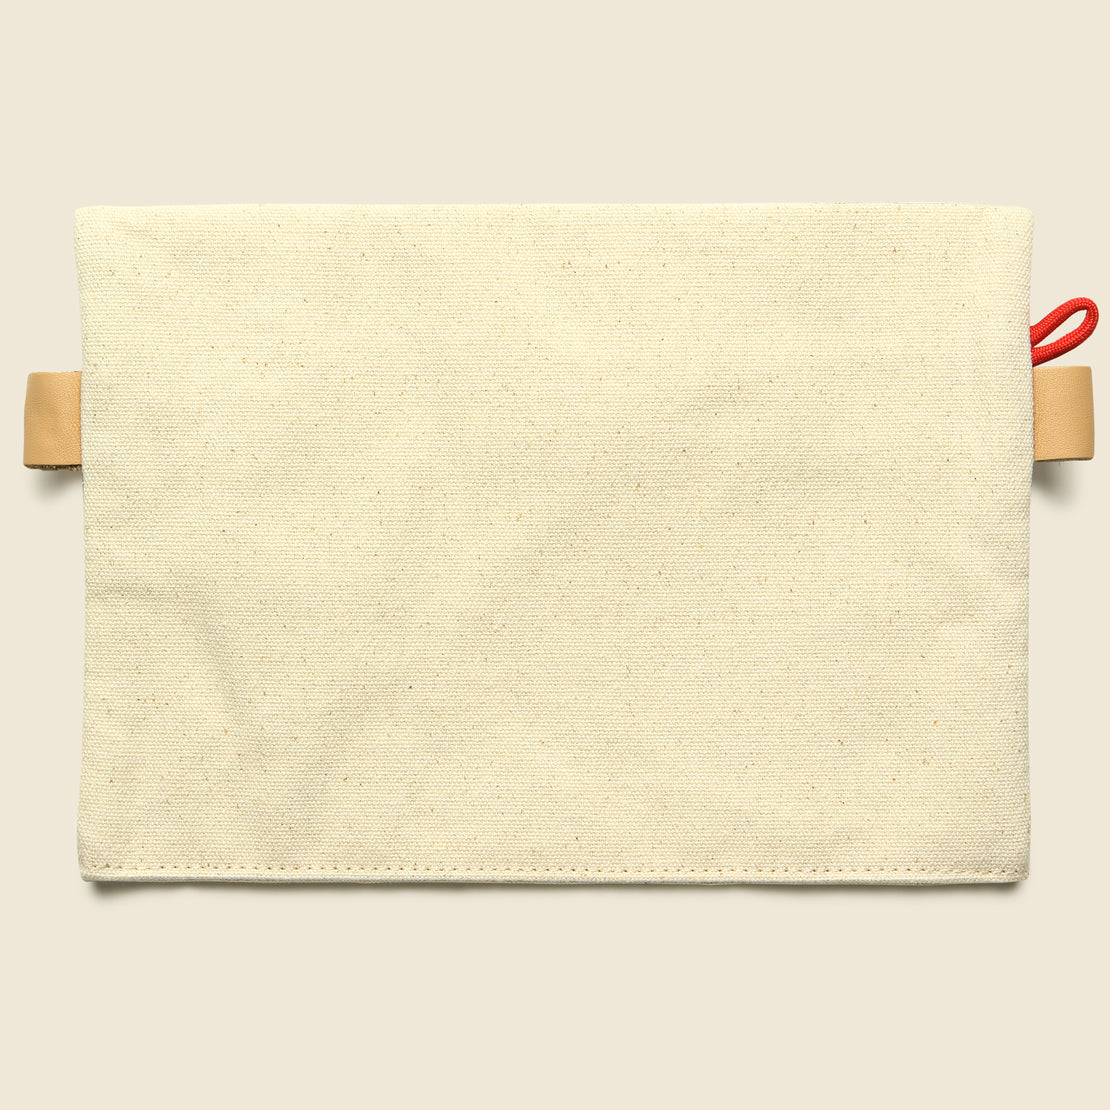 Medium Accessory Bag - Natural Canvas - Topo Designs - STAG Provisions - Accessories - Bags / Luggage